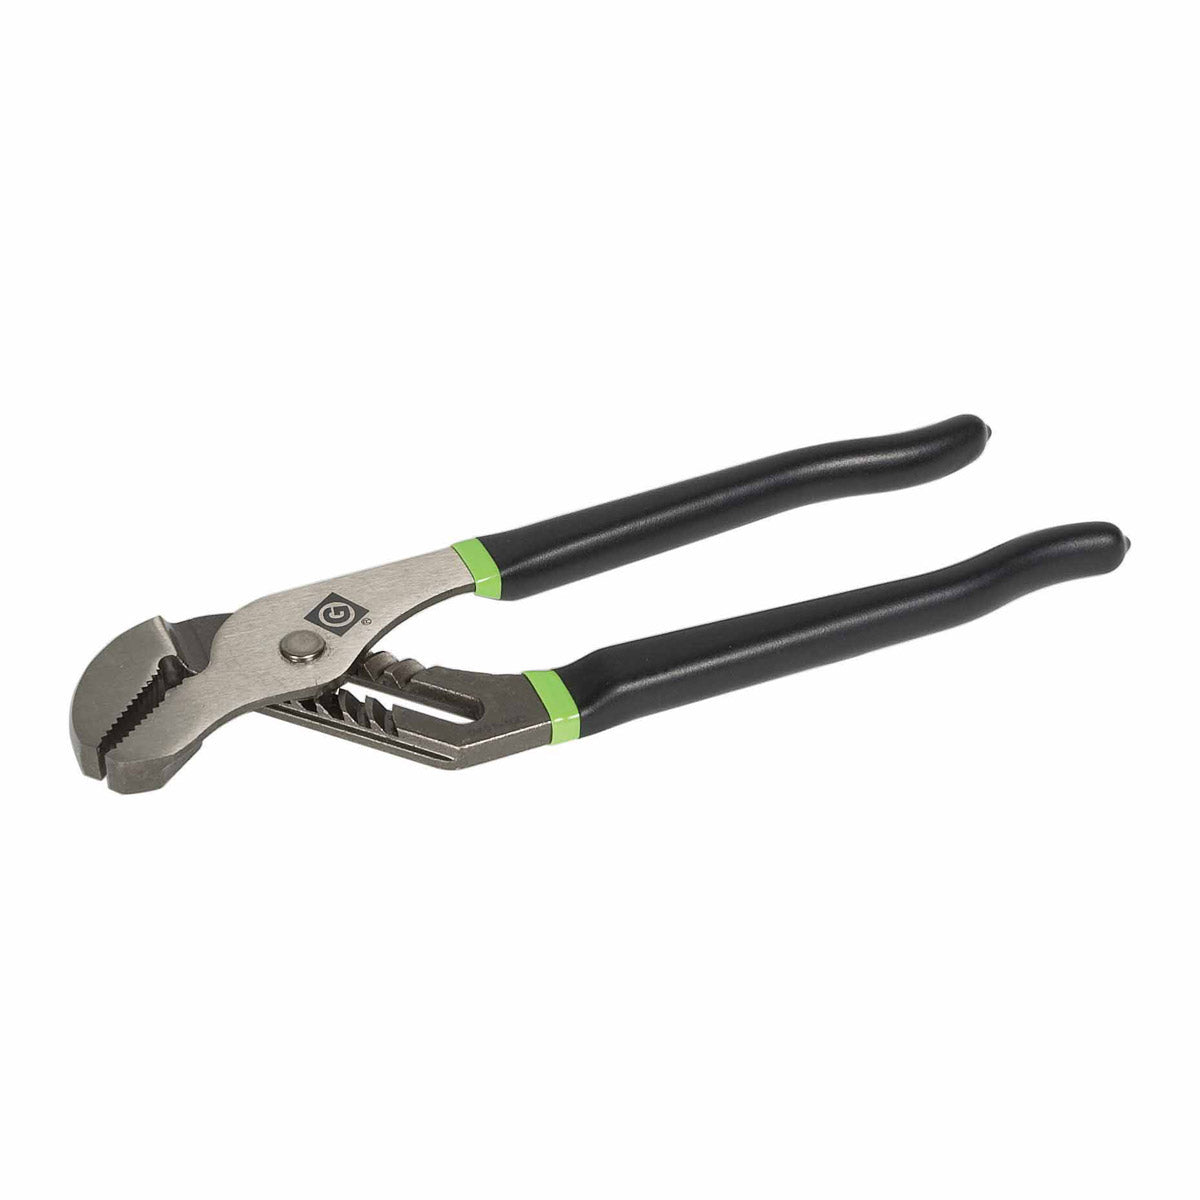 Greenlee 0451-10D 10" Pump Pliers with dipped grip